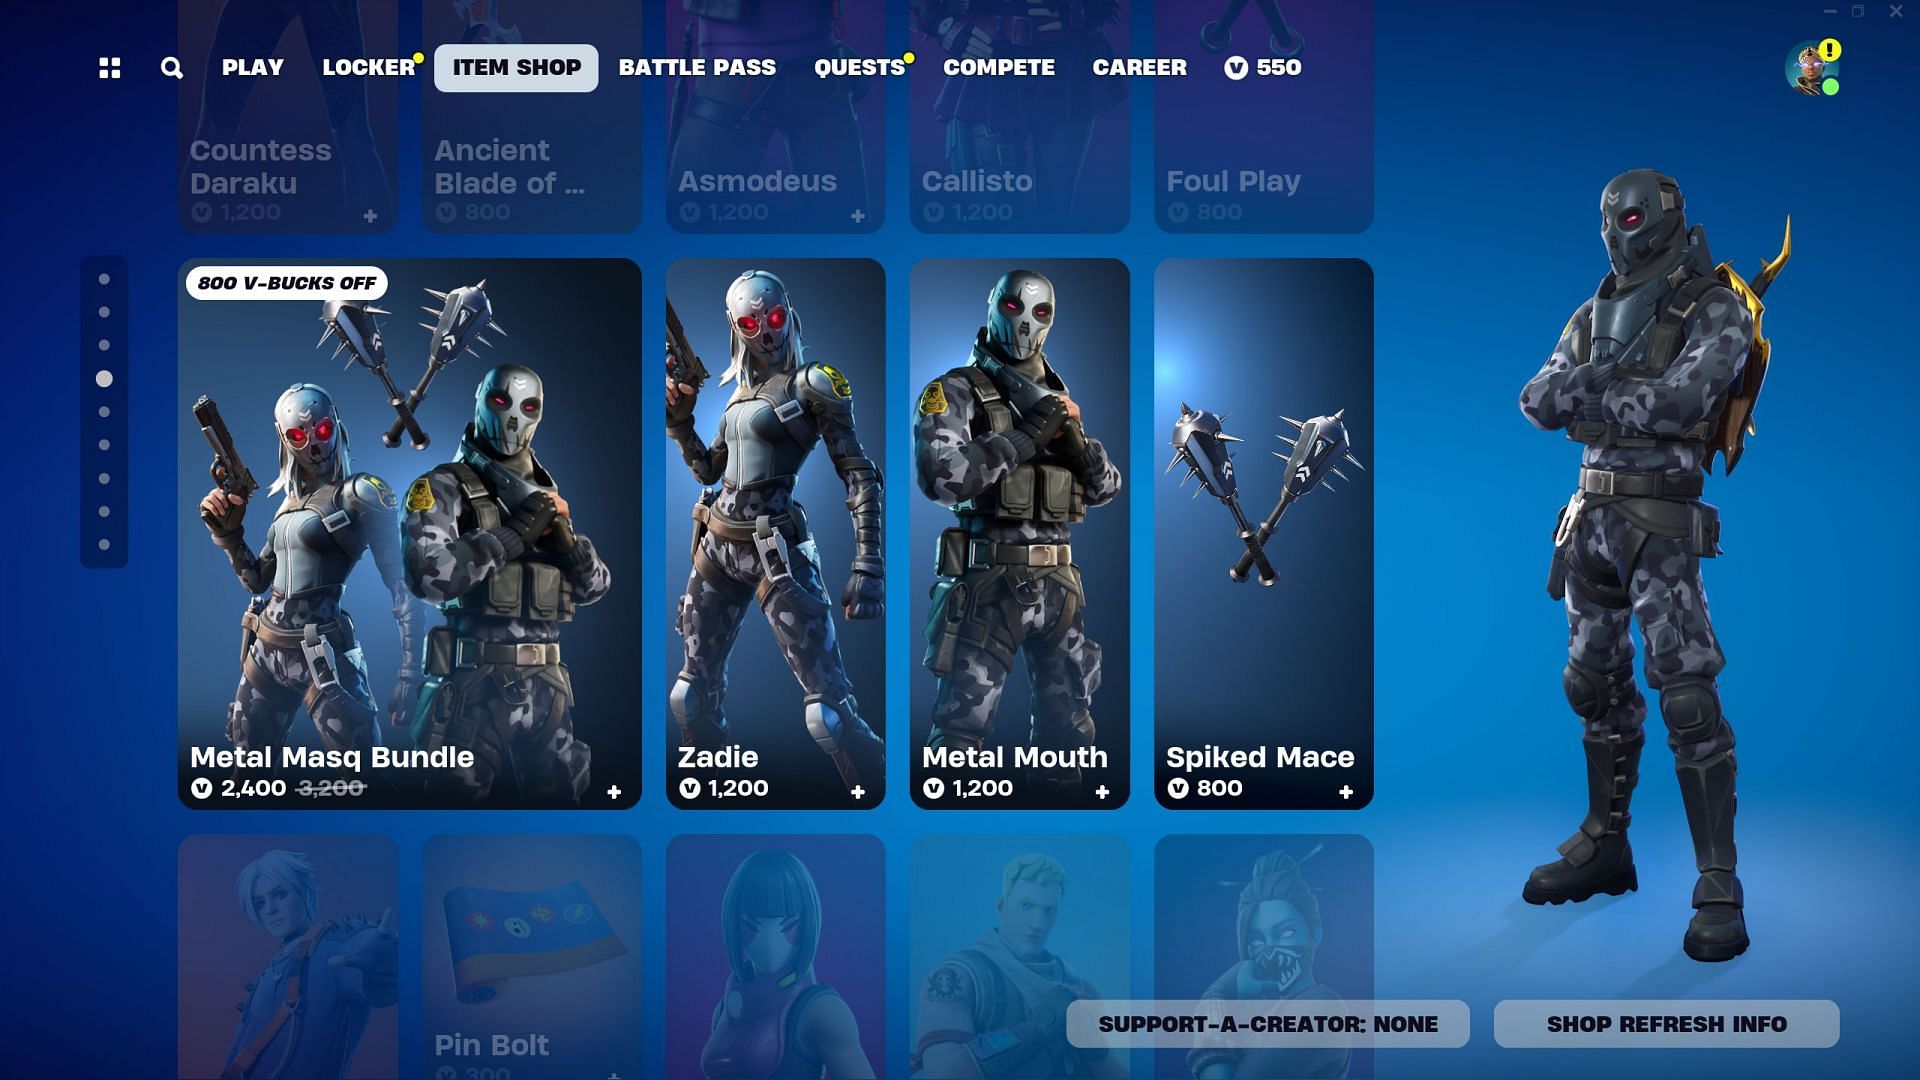 Zadie and Metal Mouth skins are currently listed in the Item Shop (Image via Epic Games/Fortnite)